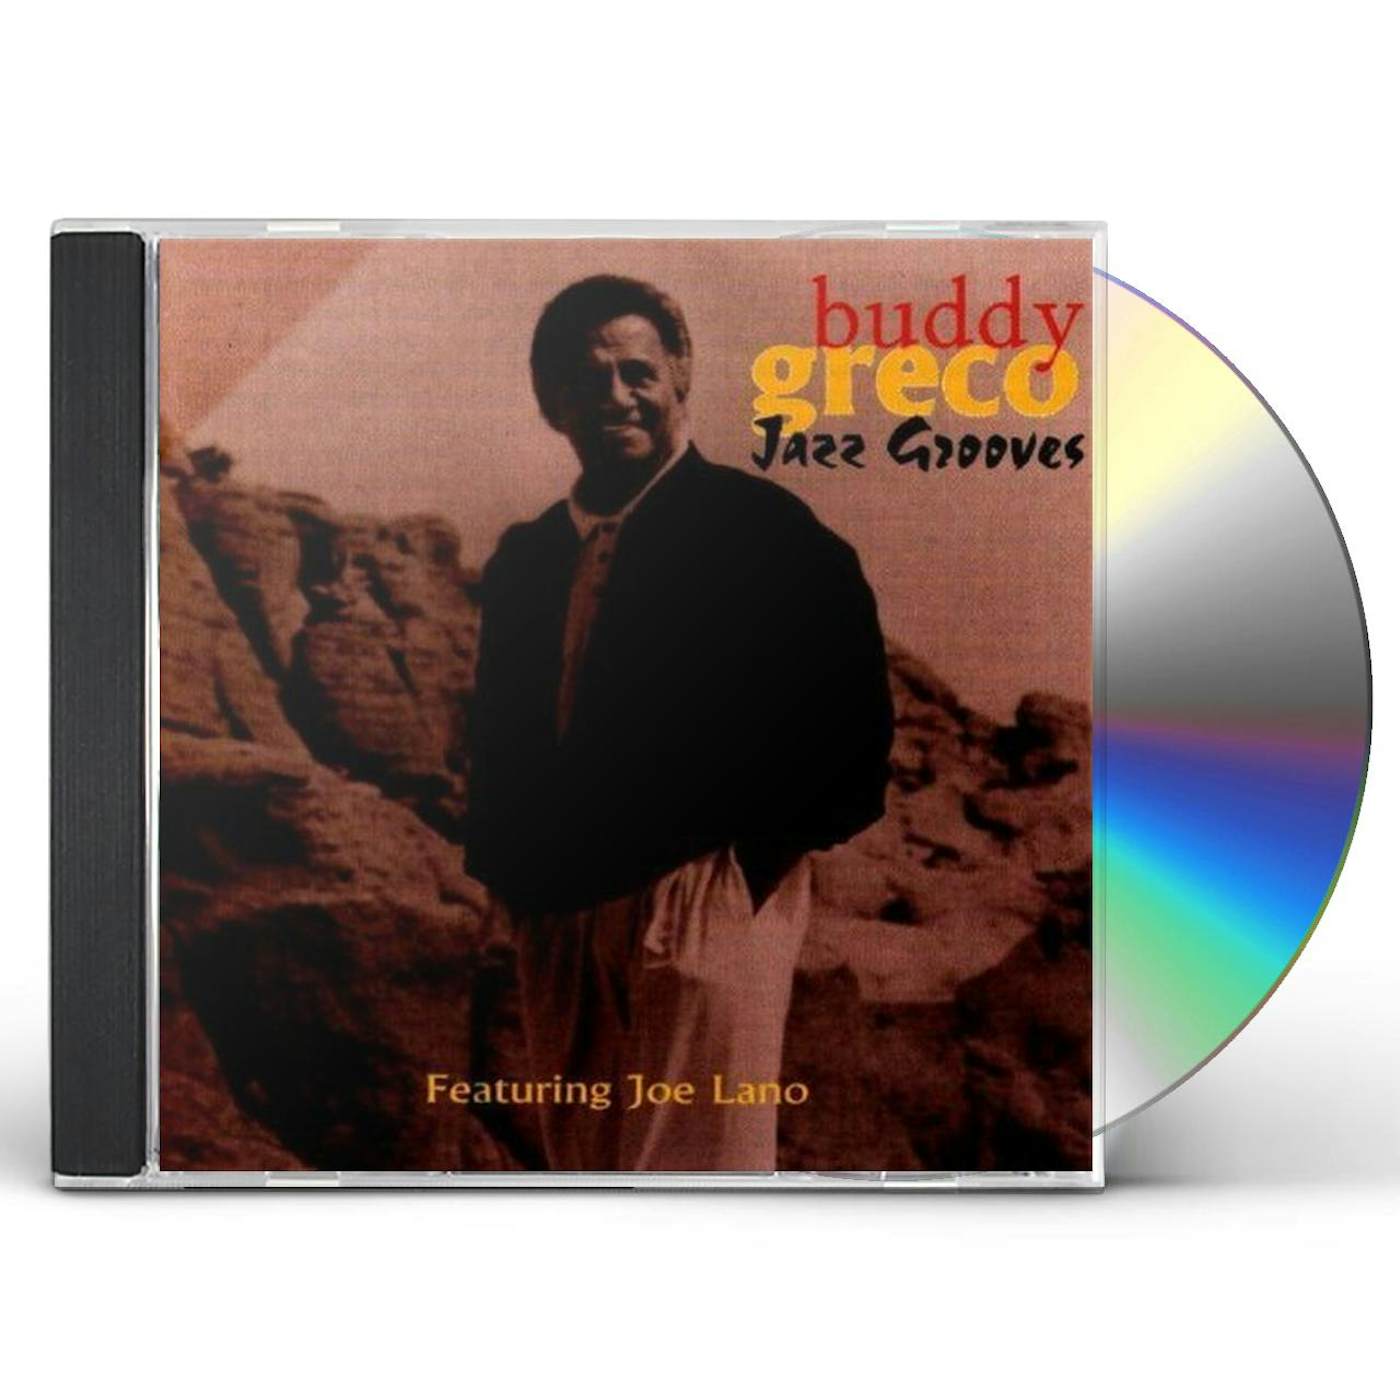 Buddy Greco JAZZ GROOVES CD